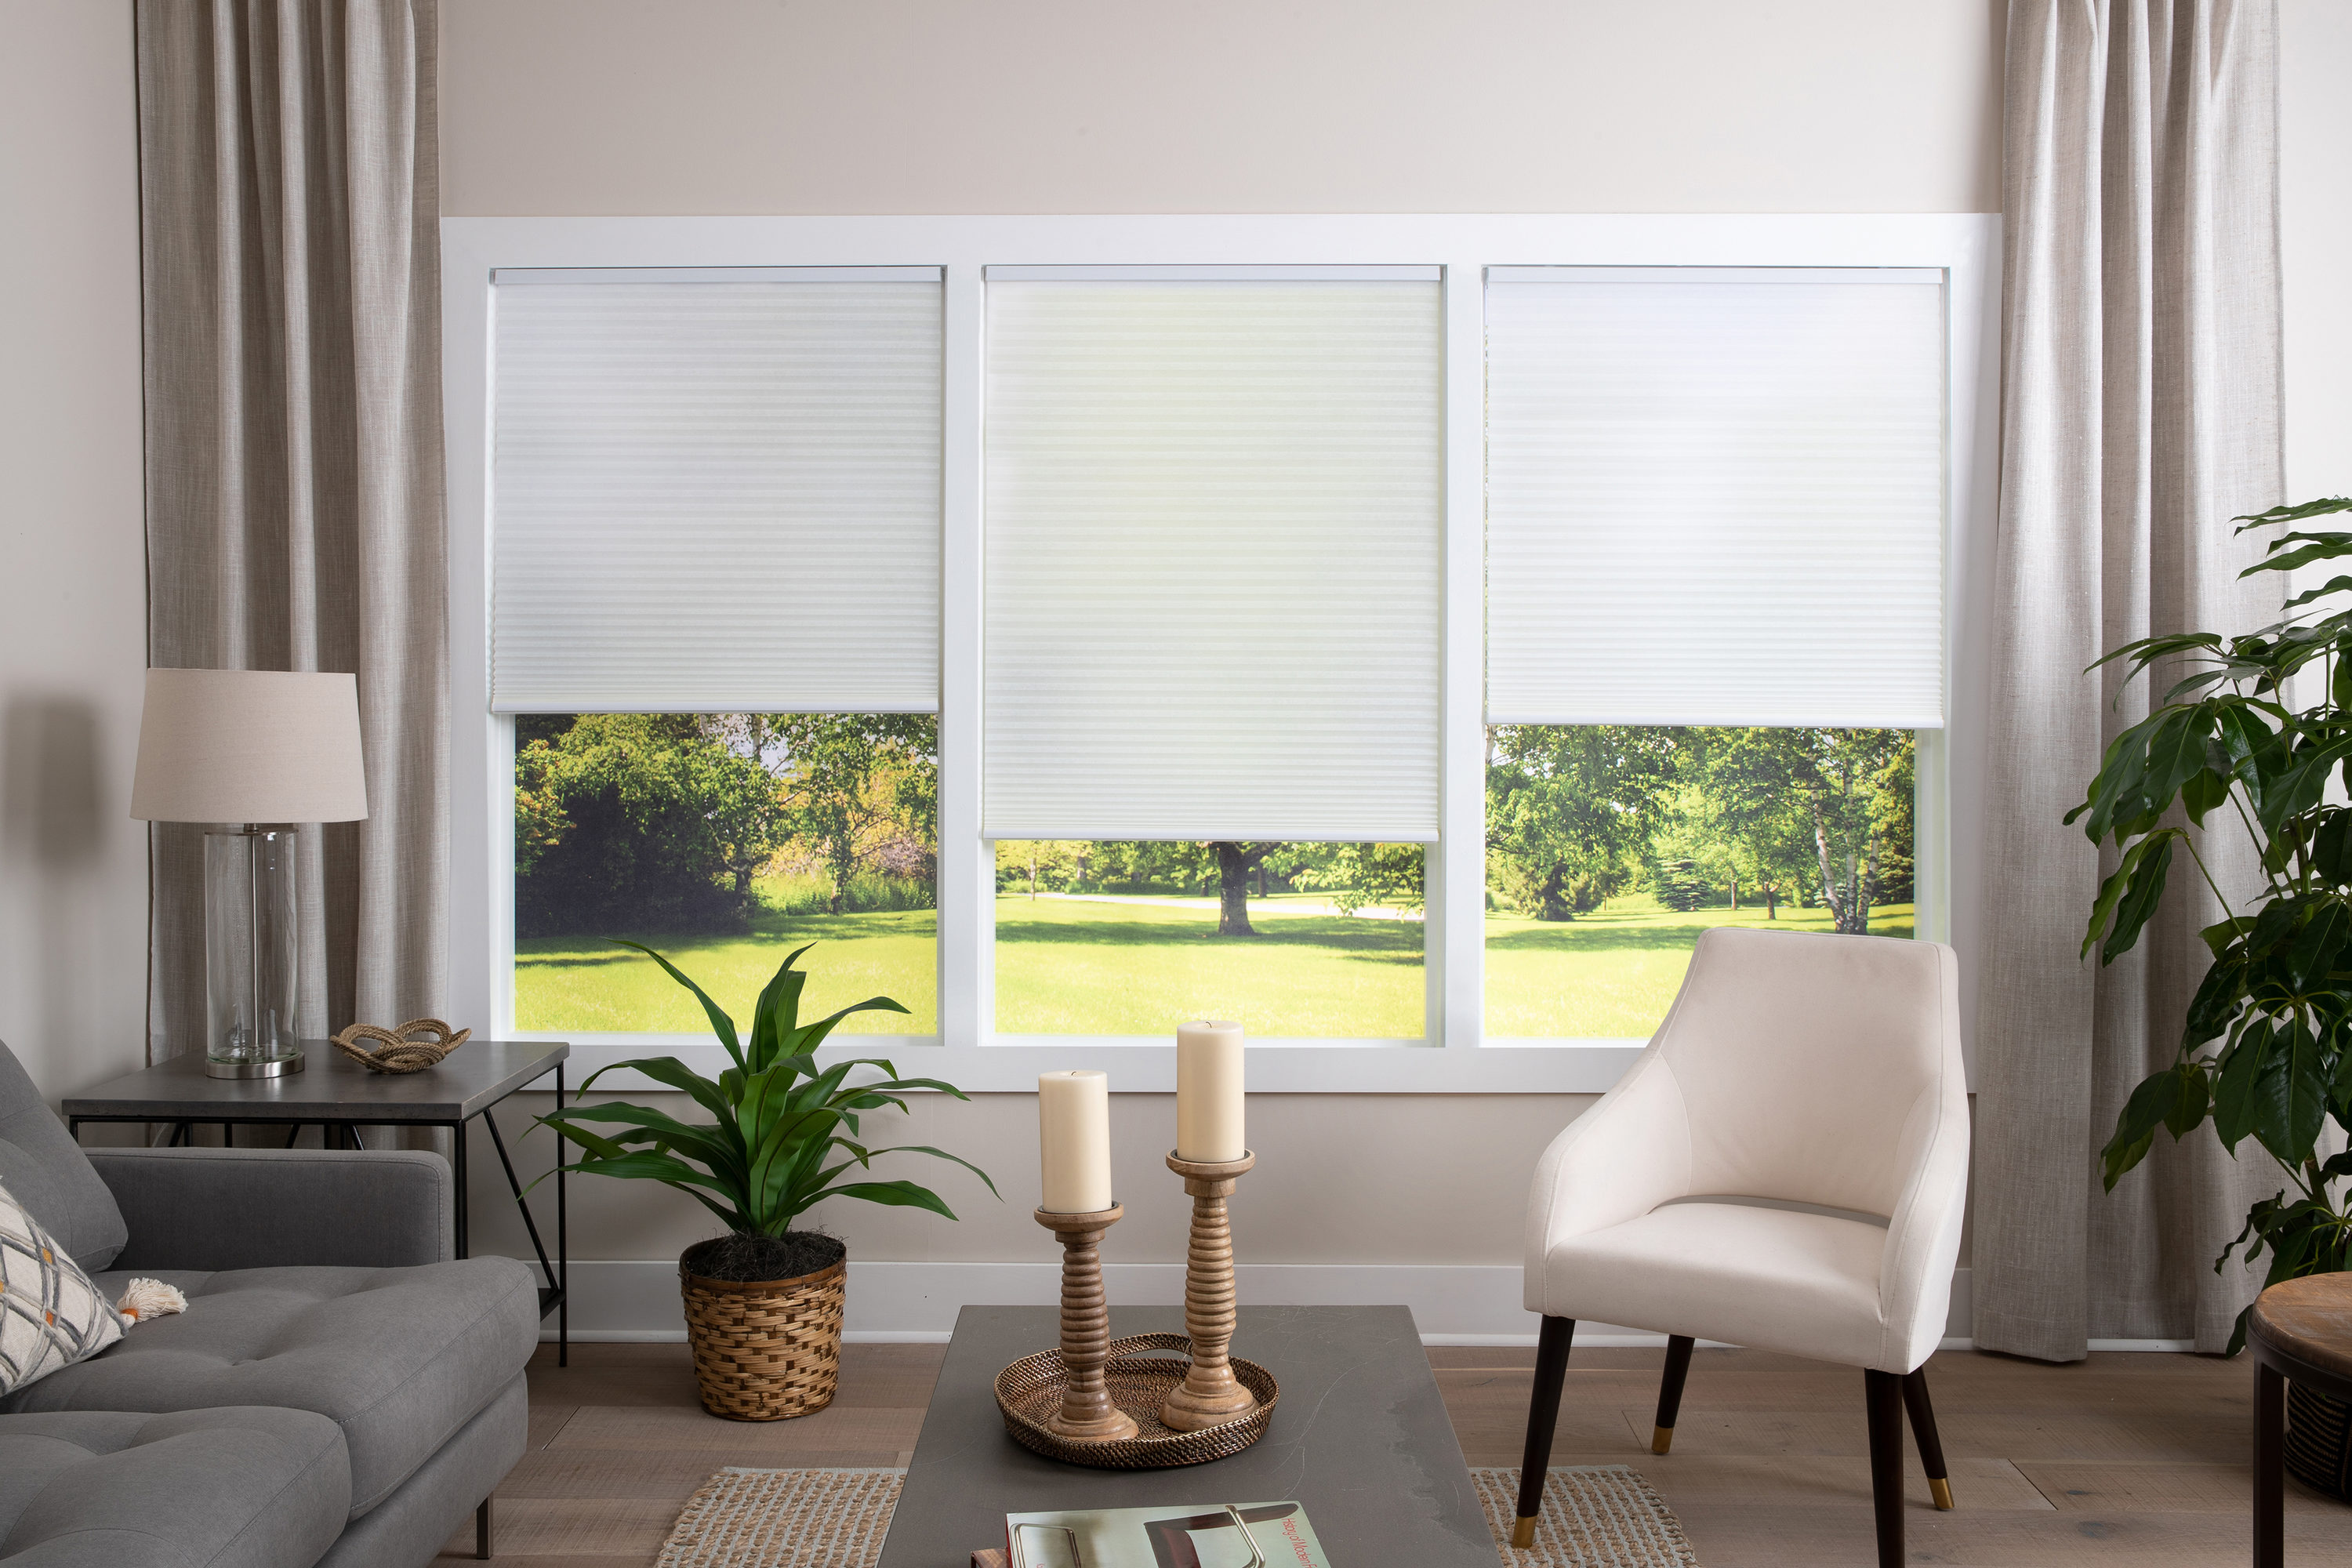 Light Filtering Cordless Top Down Bottom Up Shades, Top Down Bottom Up  Cellular Shades, Top Down Blinds, Up Down Blinds, Up Down Shades, Top Down